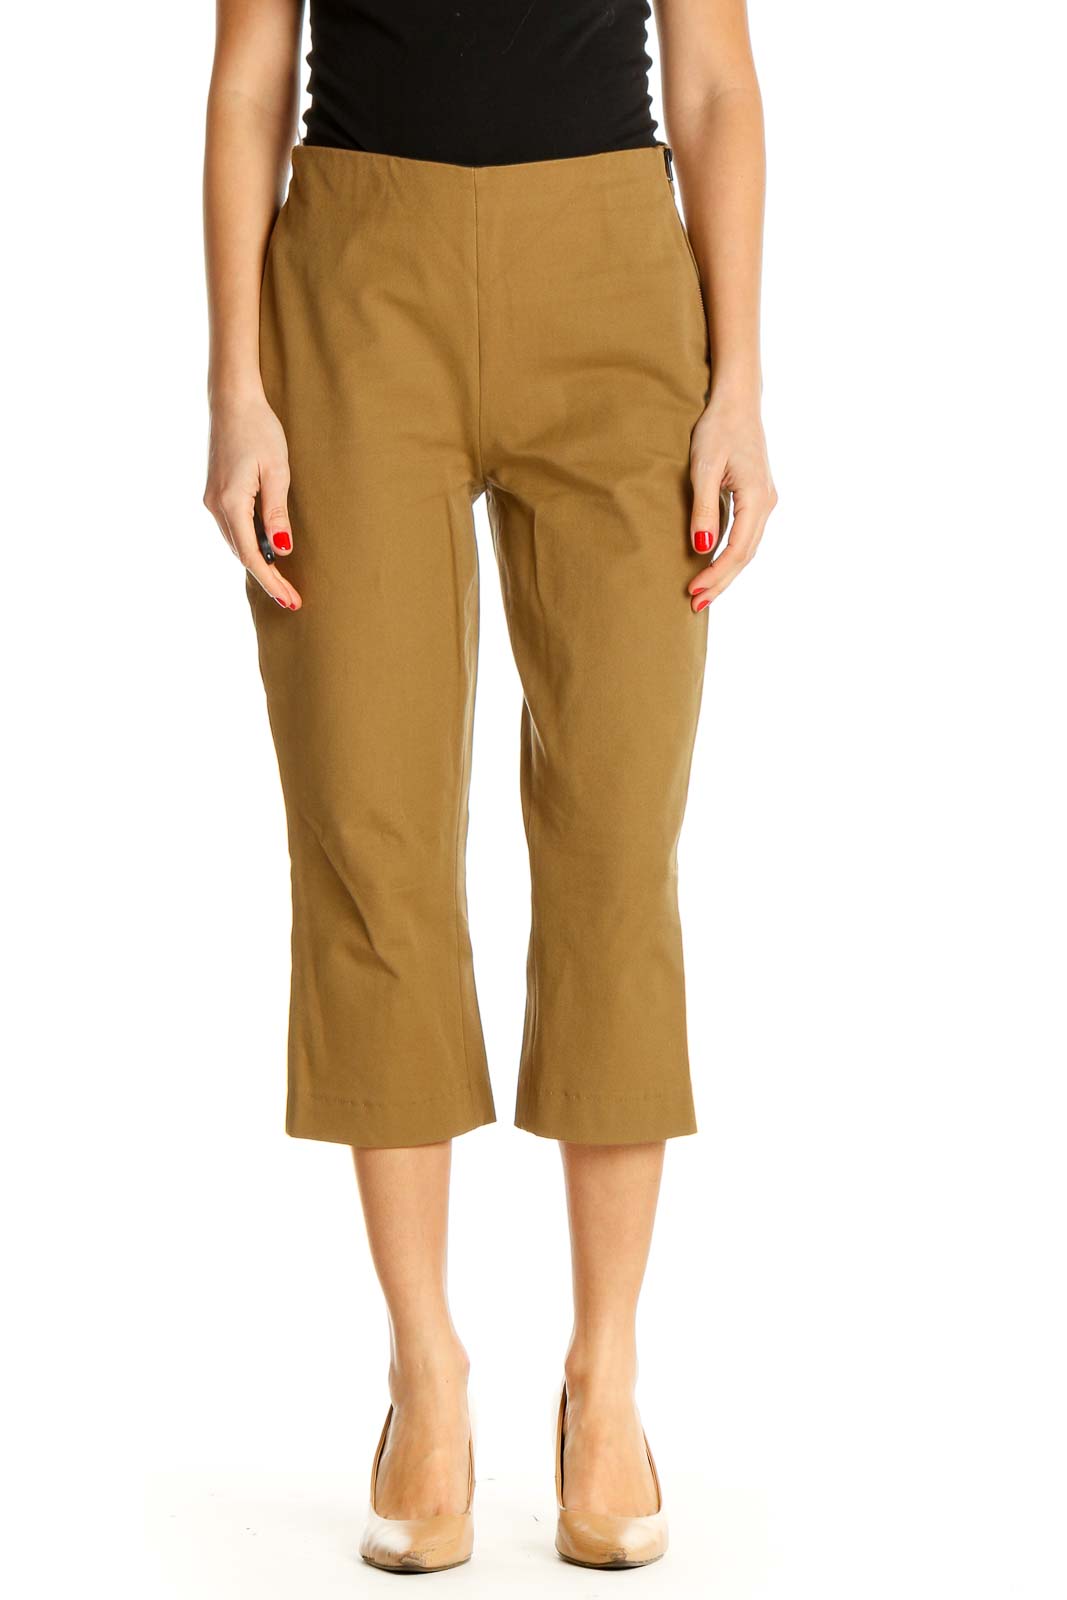 Brown Solid All Day Wear Capri Pants Front